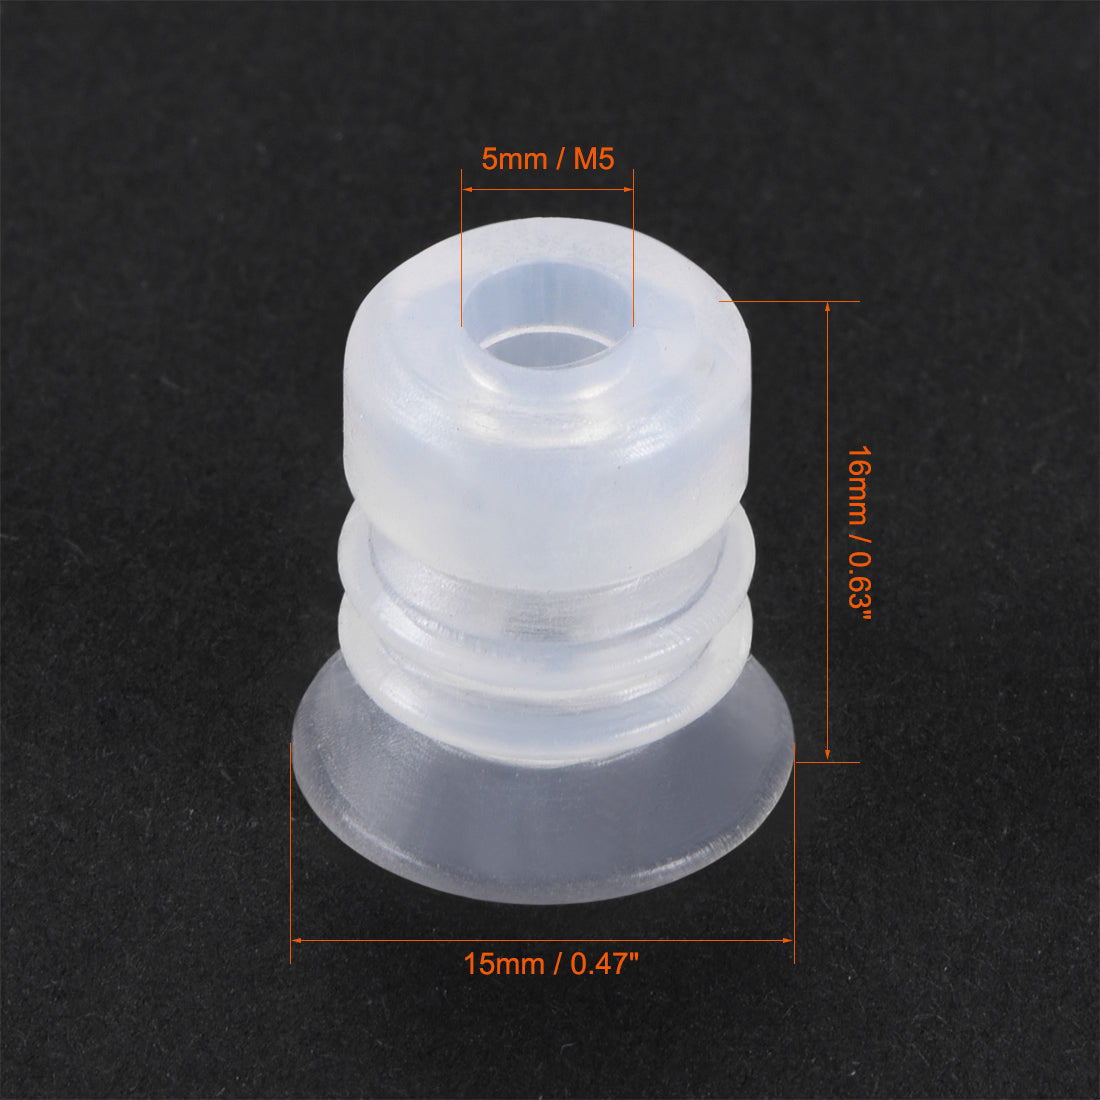 uxcell Uxcell Clear White Soft Silicone Waterproof Vacuum Suction Cup 15mmx5mm Bellows Suction Cup,4pcs